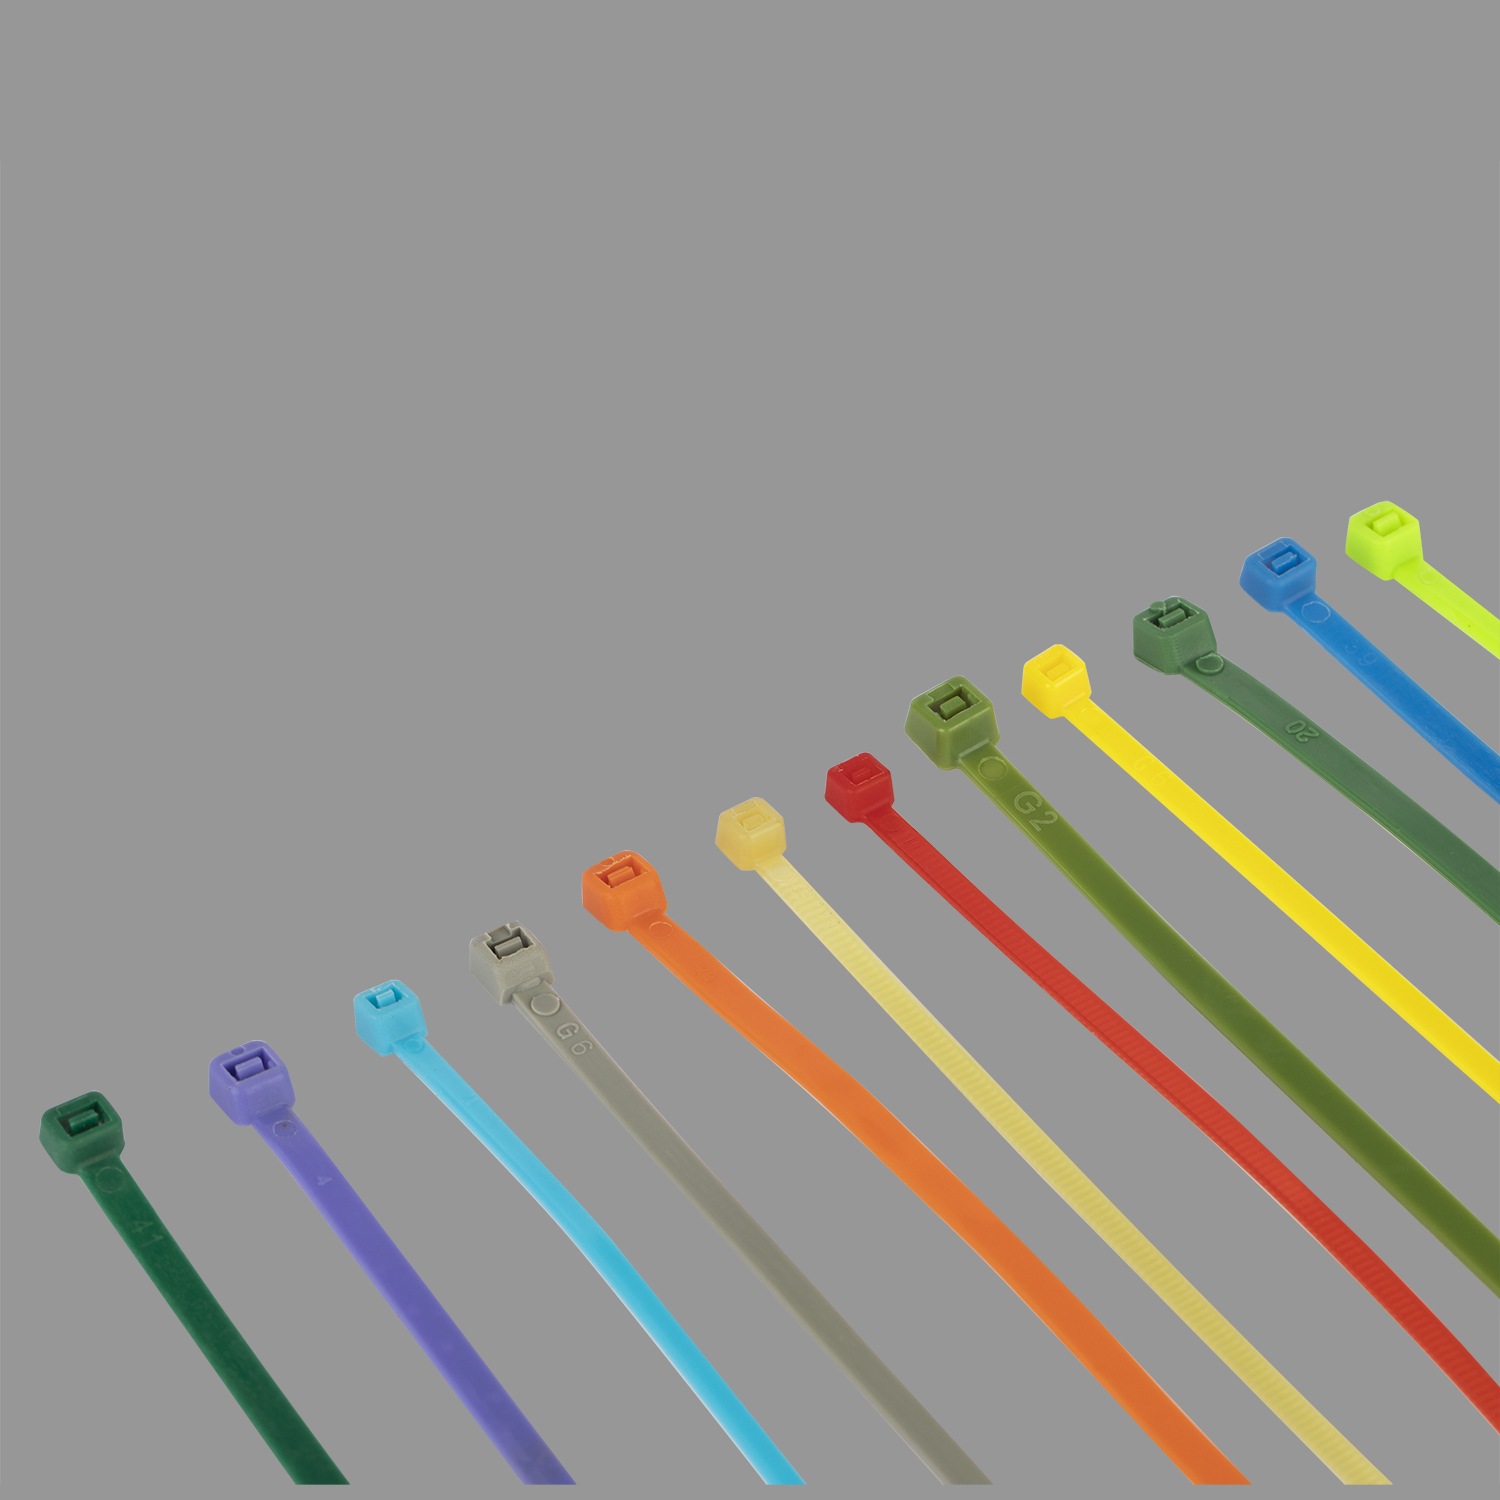 Self-Locking Plastic Nylon 66 Cable Tie with UL Certificate